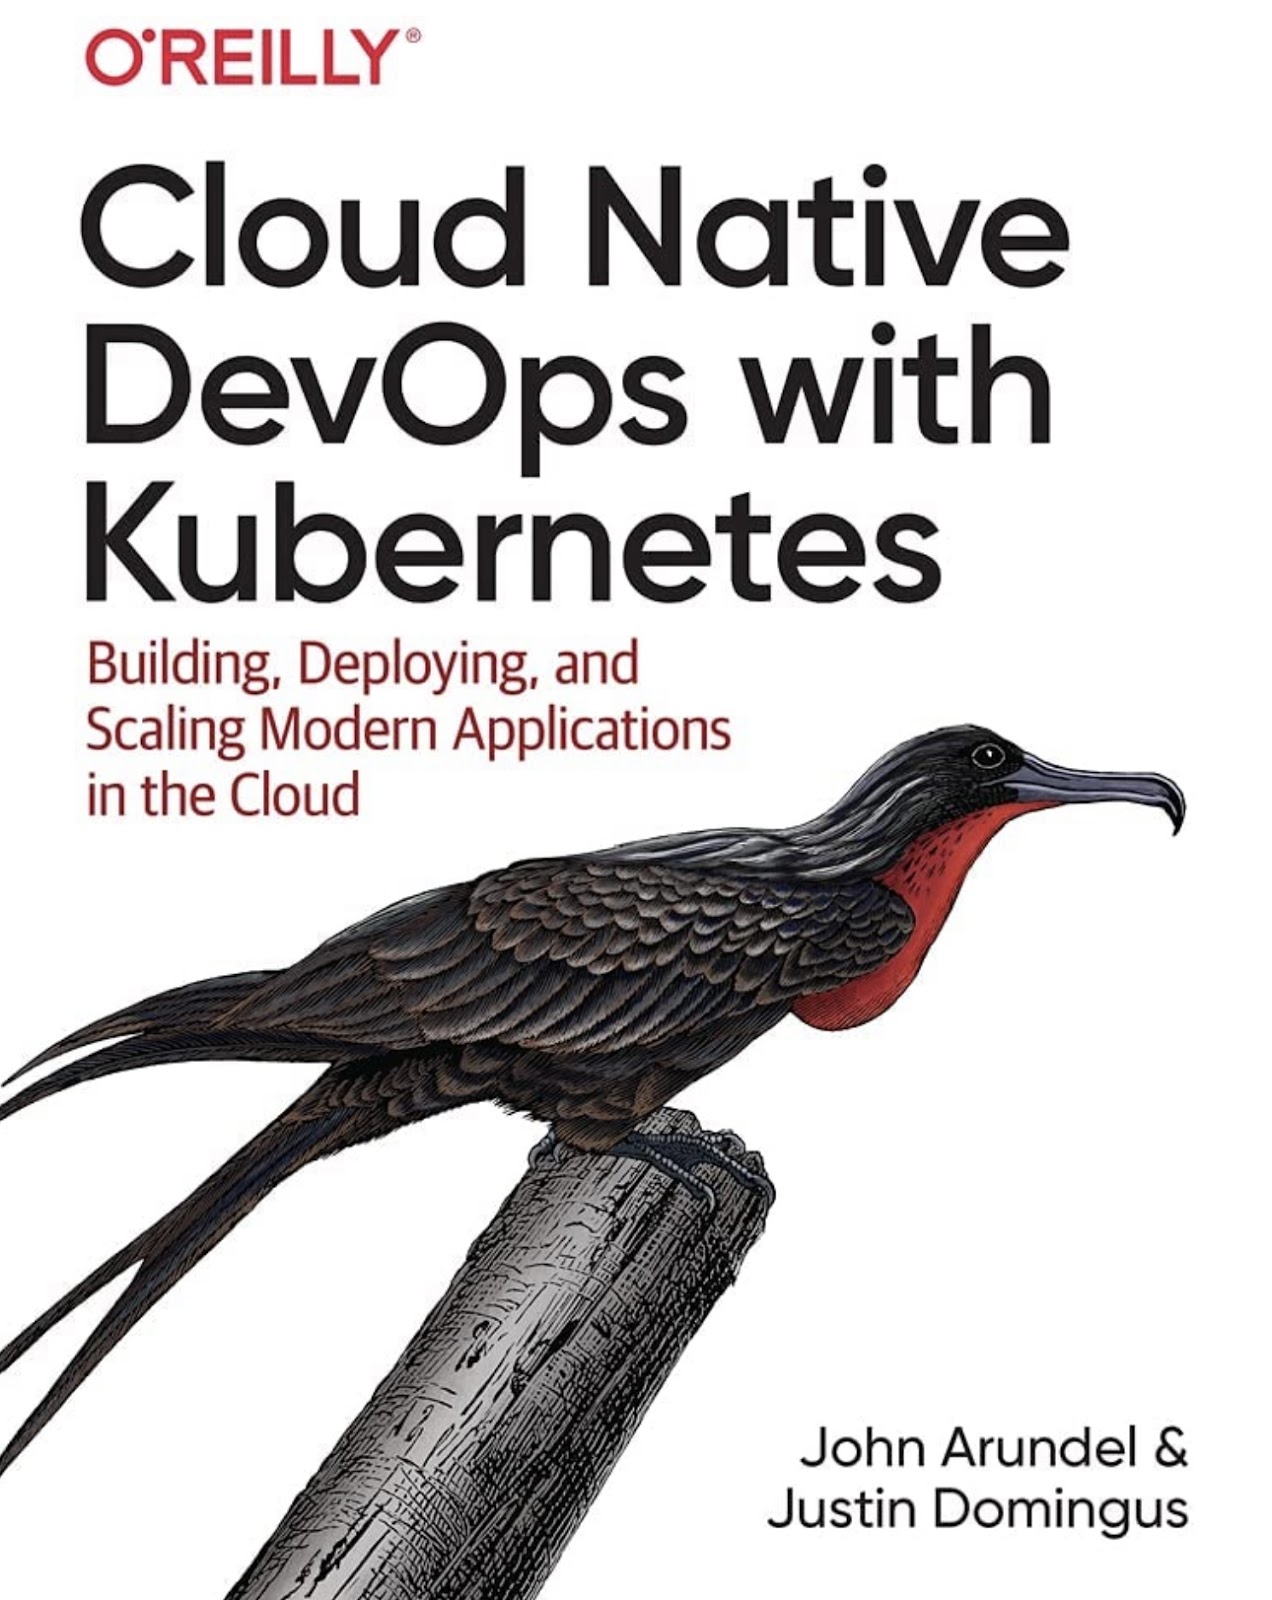 Cloud Native DevOps with Kubernetes Book Cover